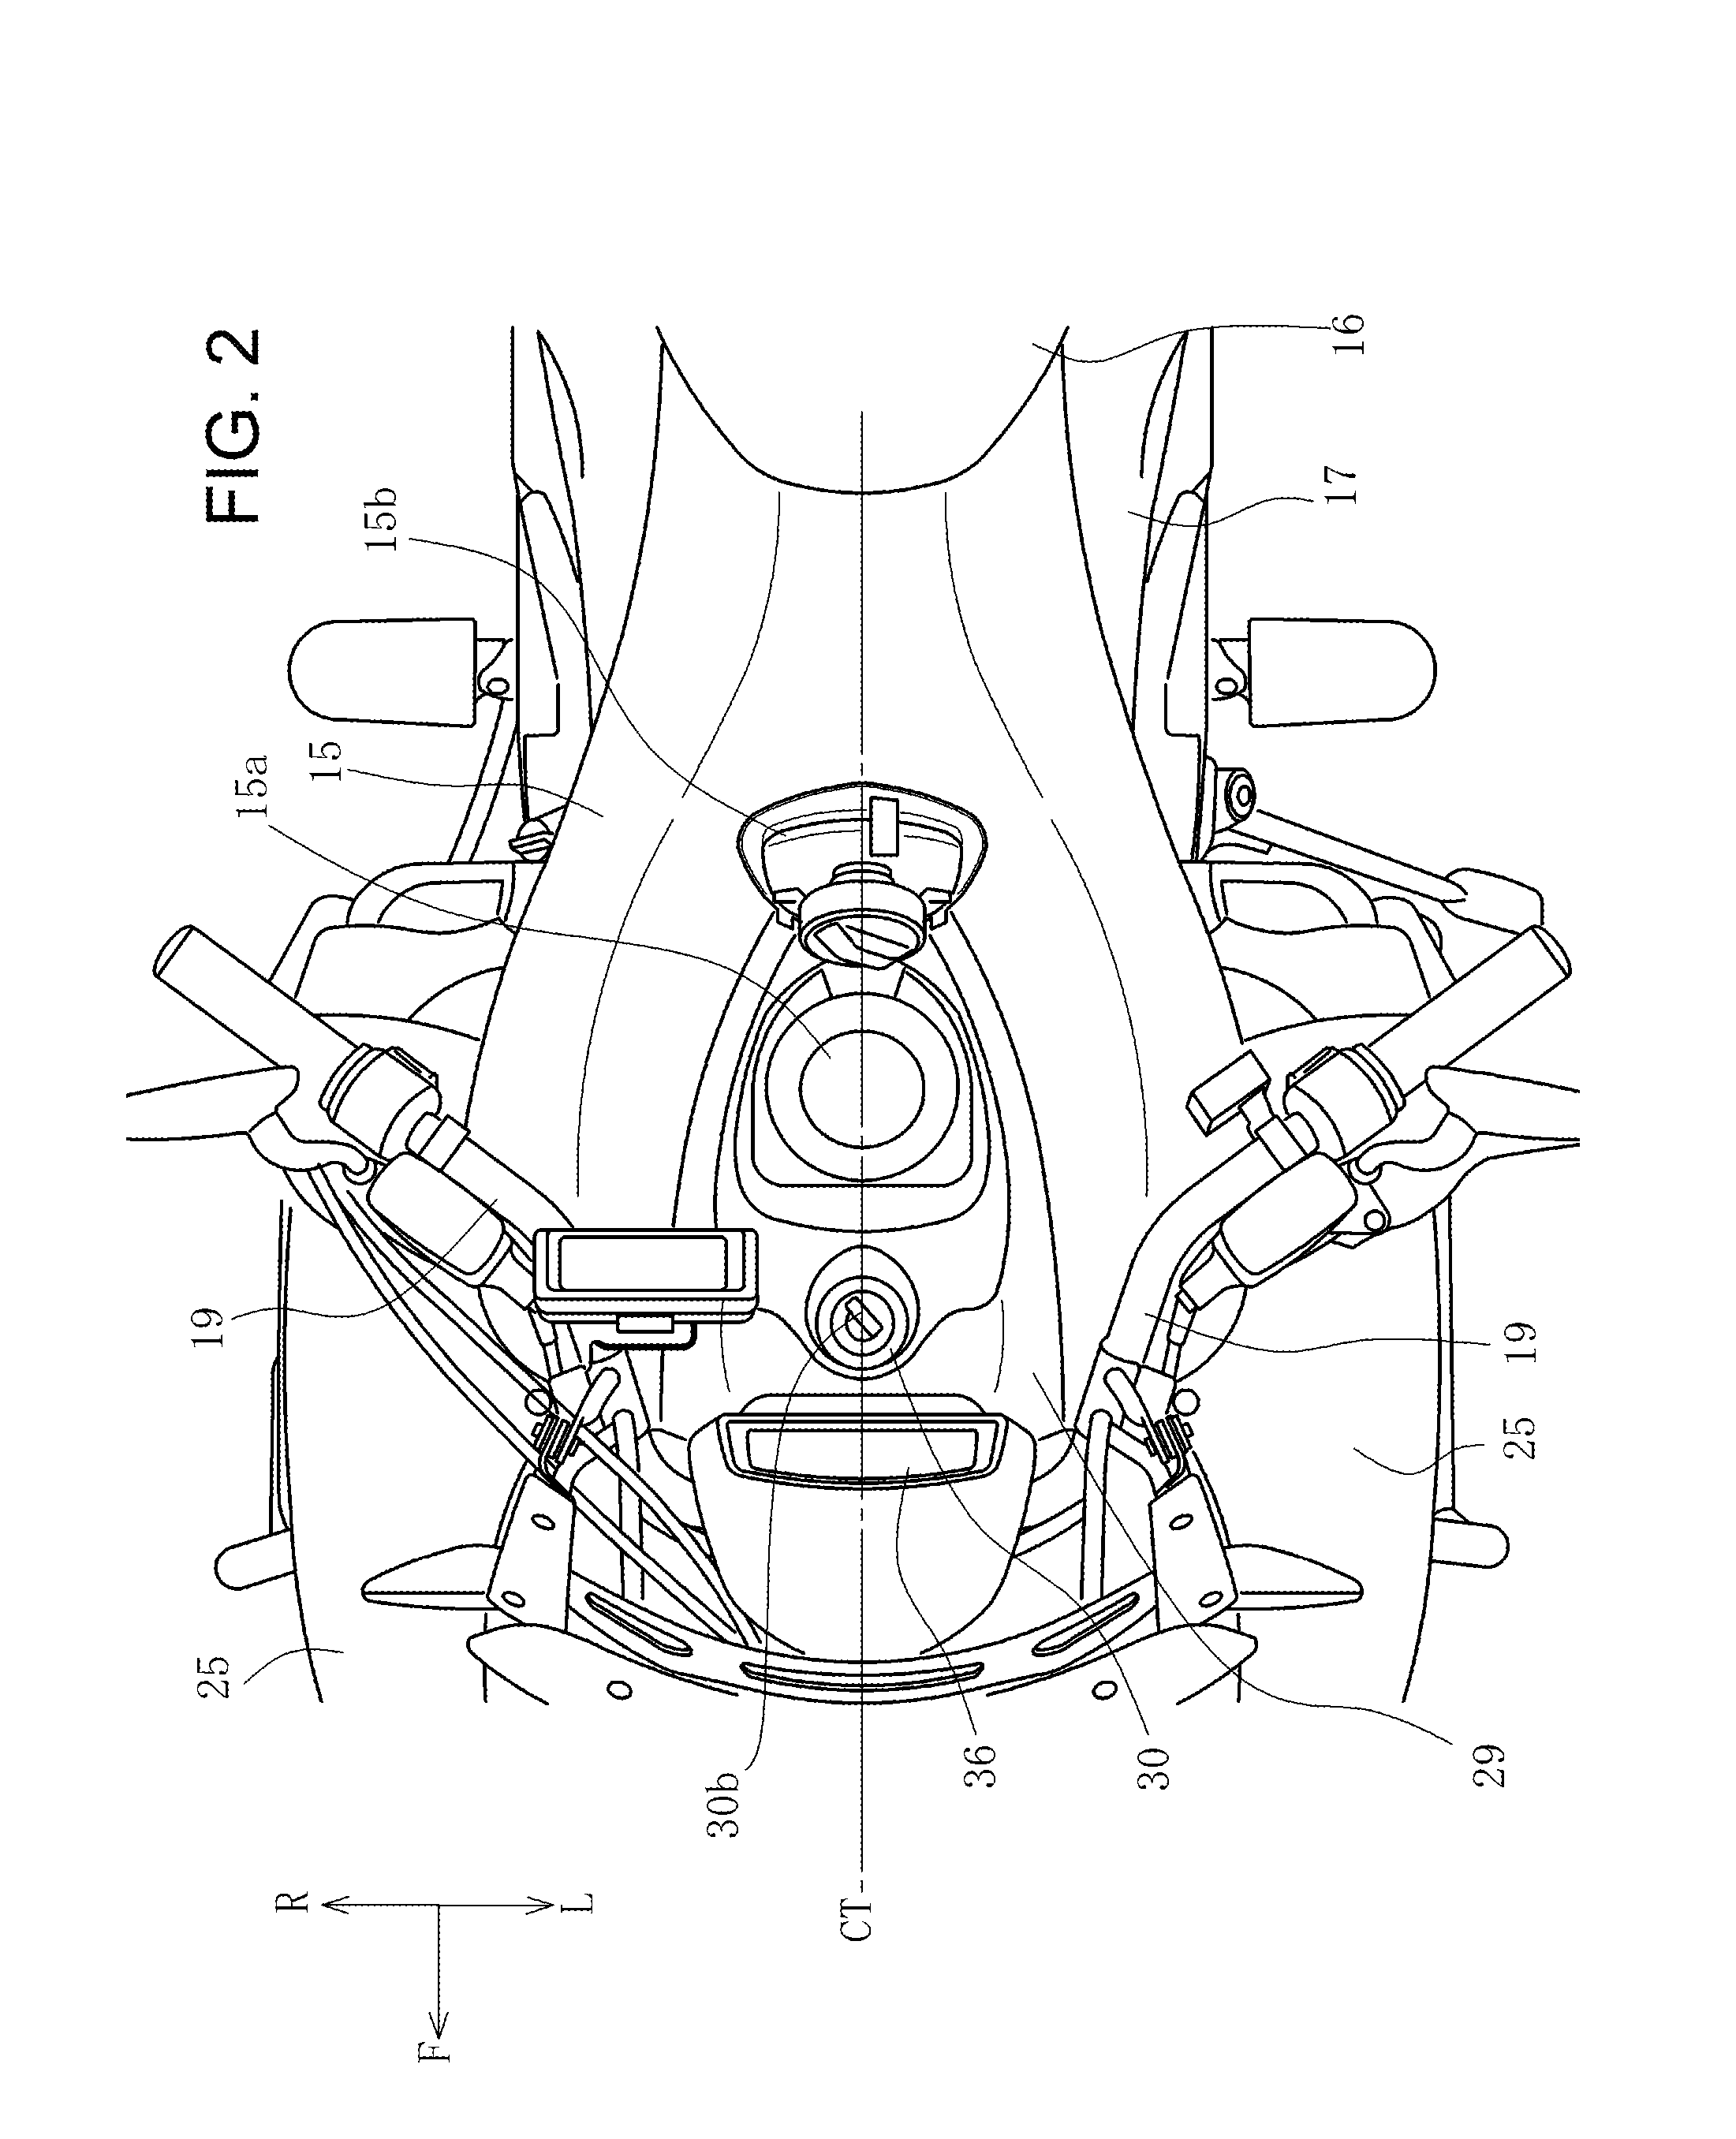 Fuel tank mounting structure of saddle-ride-type vehicle